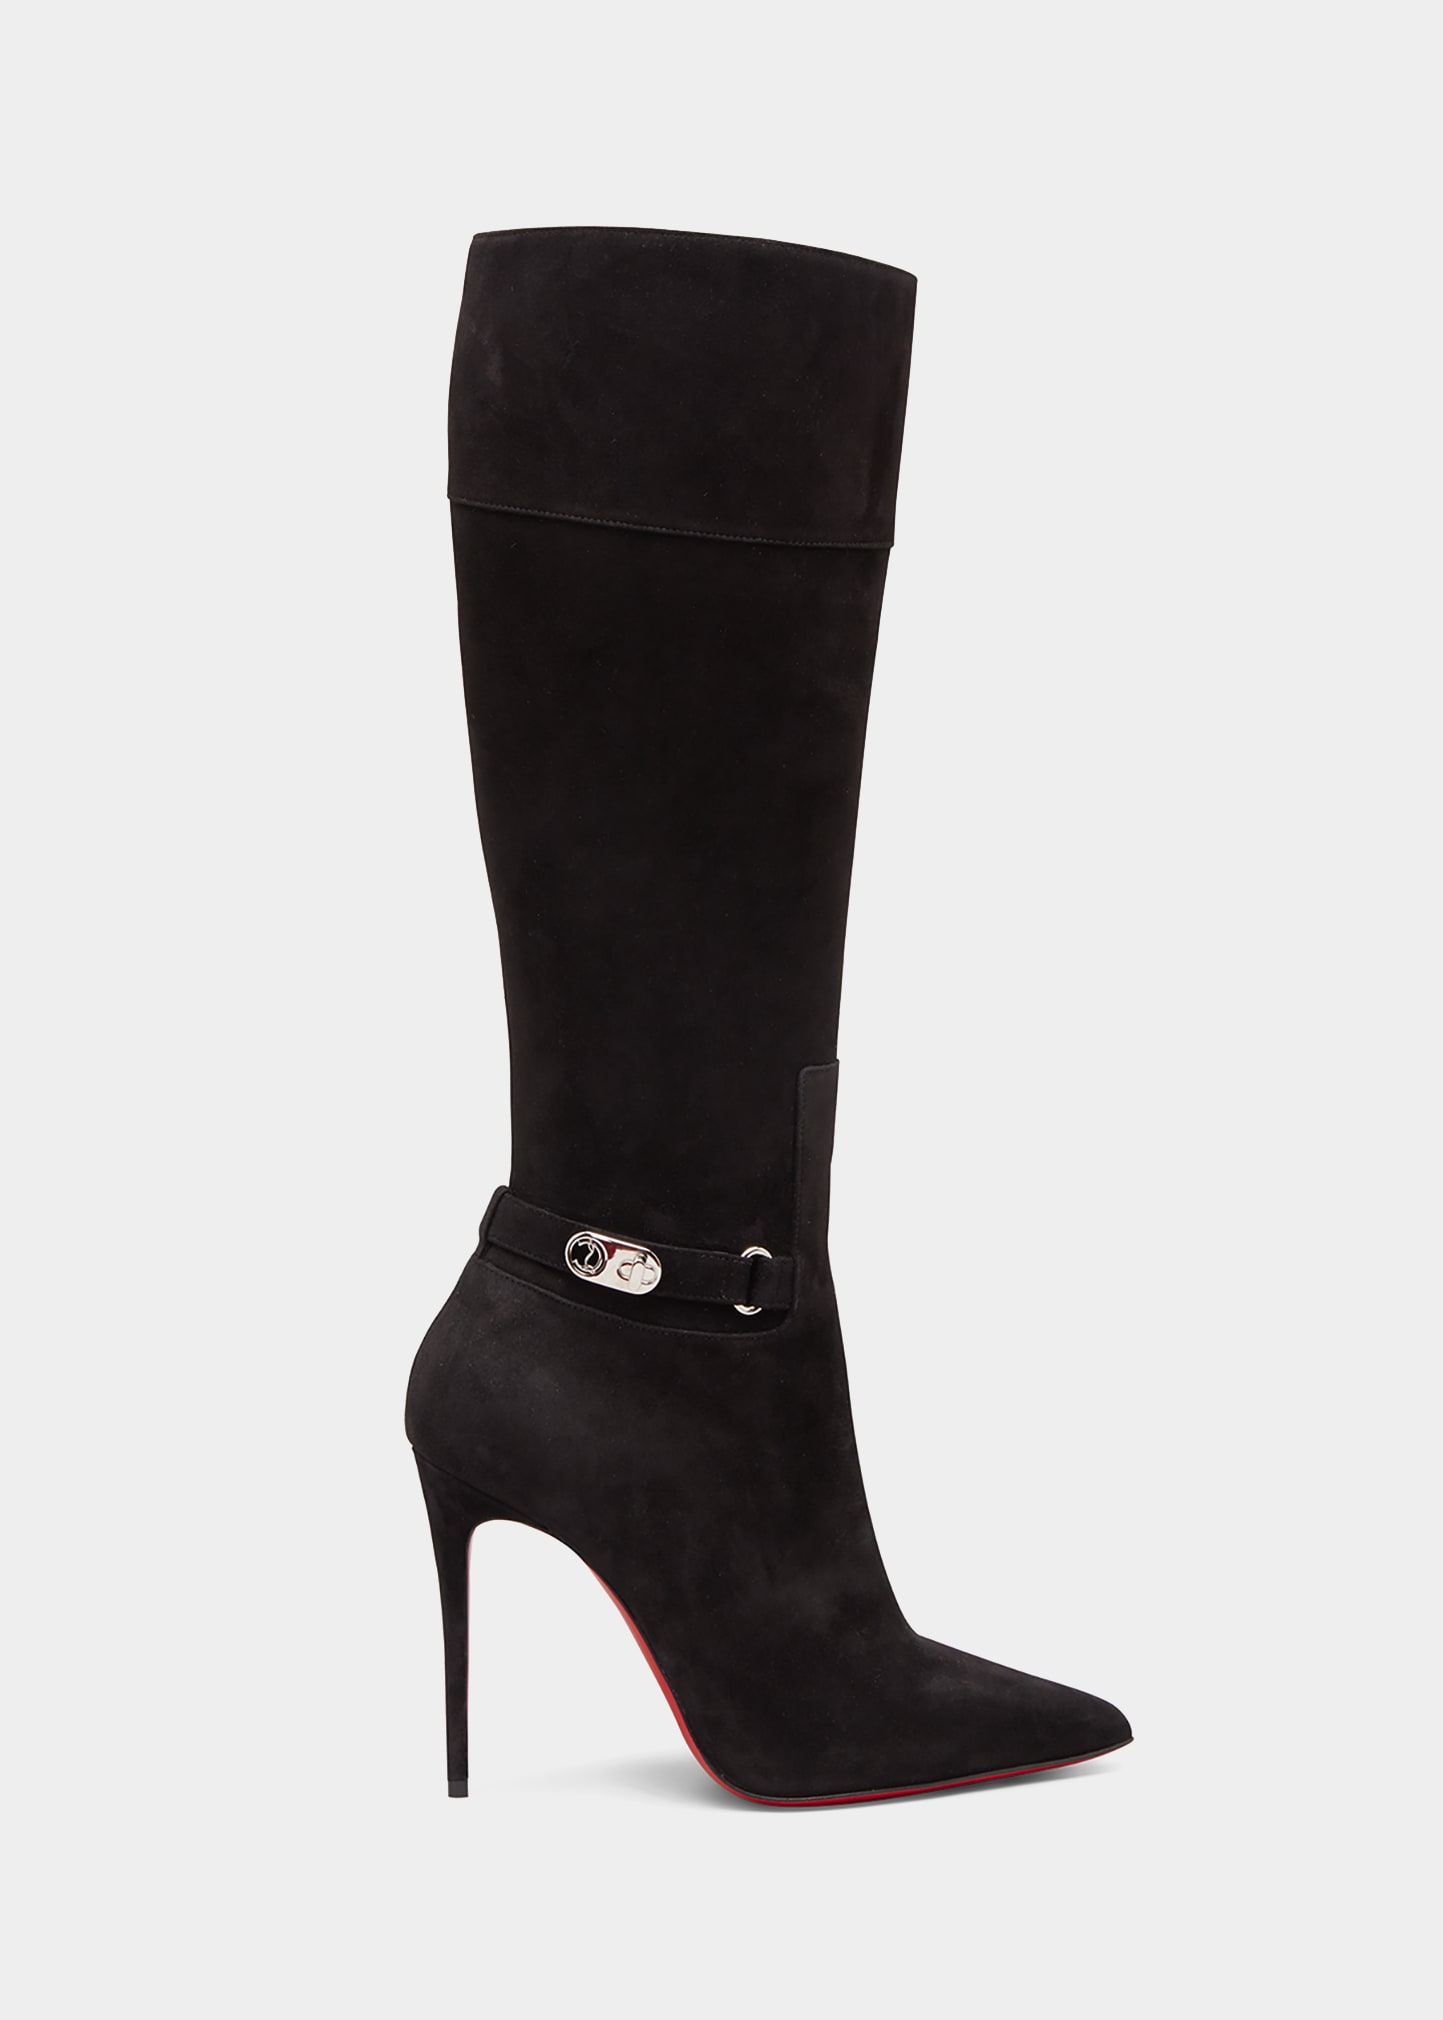 Christian Louboutin Lock Kate Suede Tall Red Sole Boots